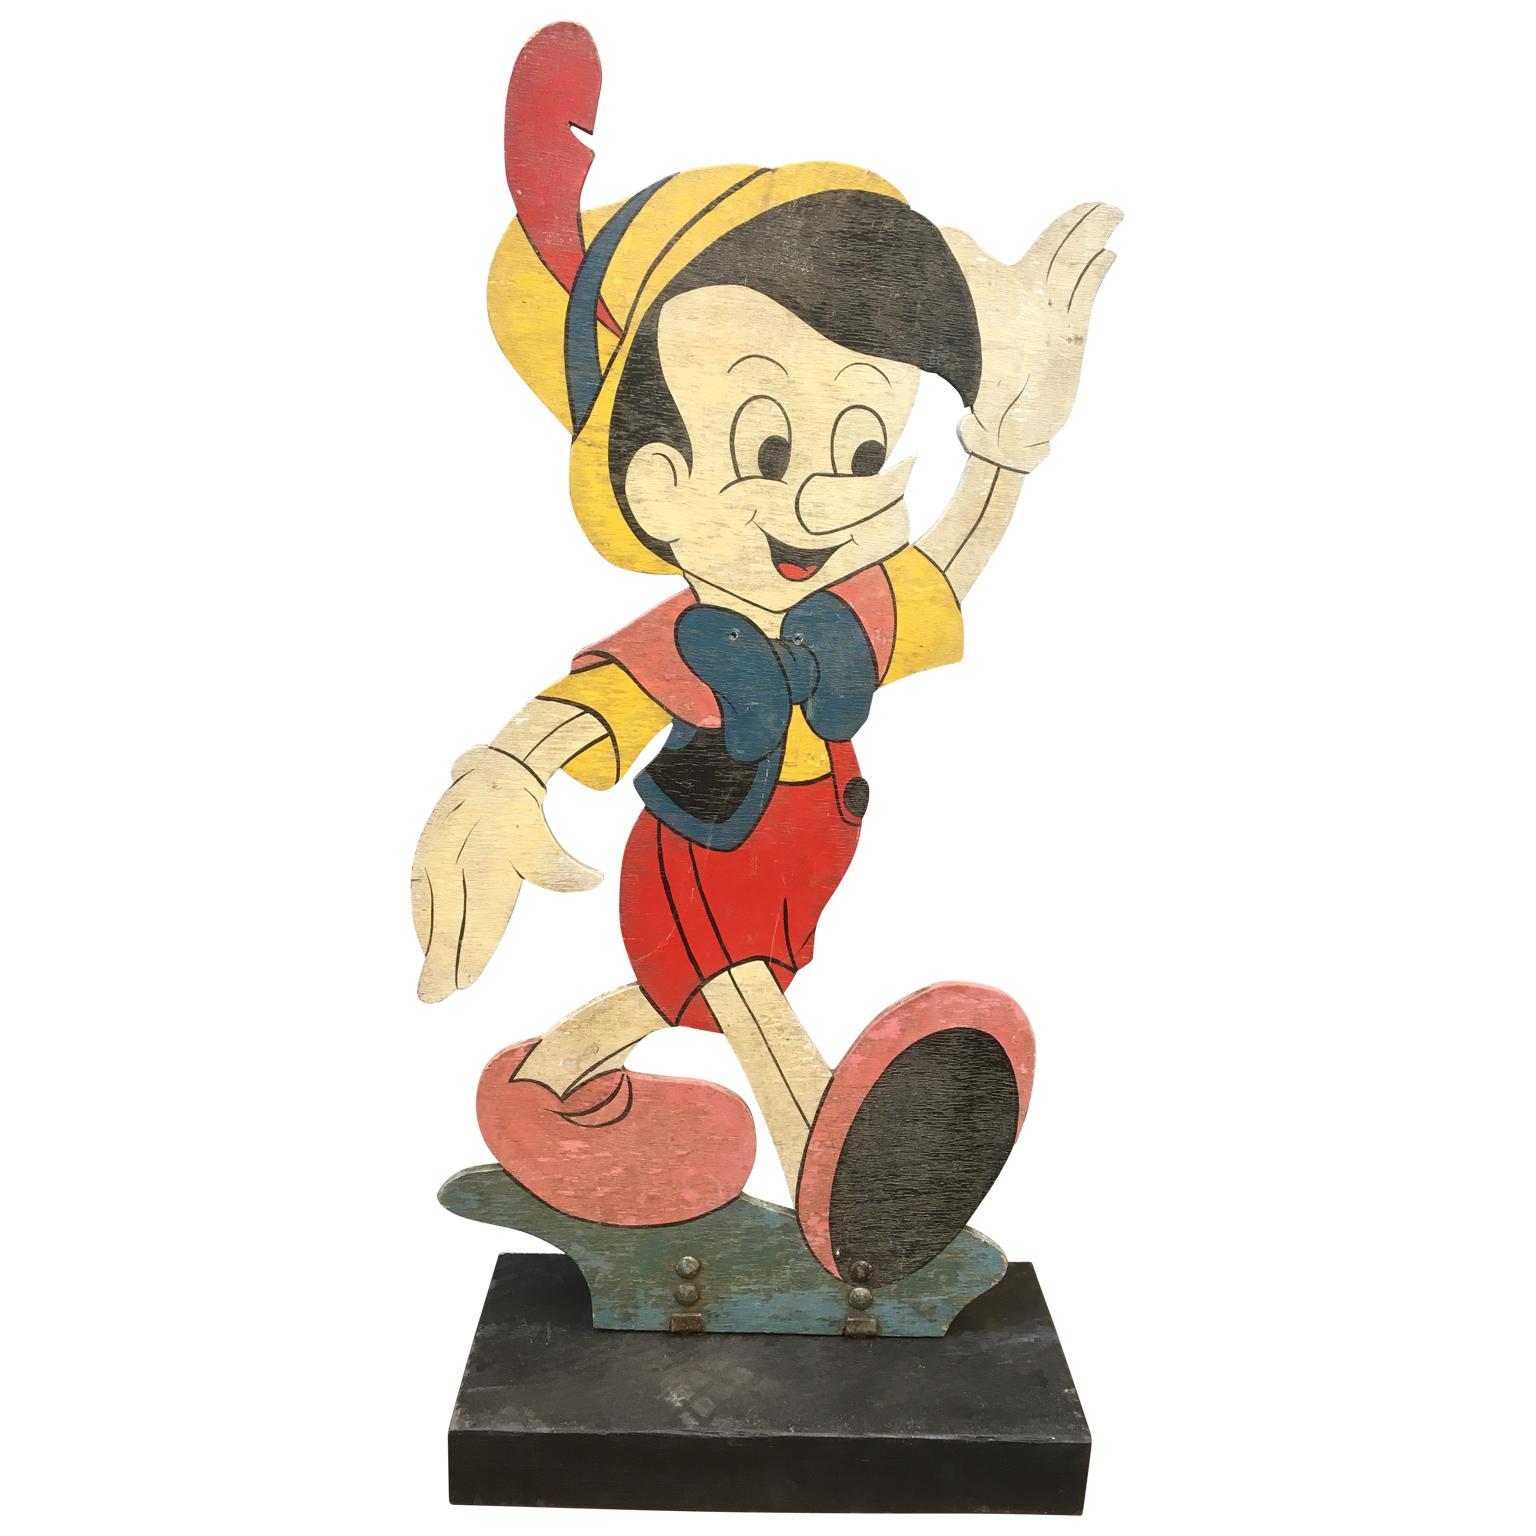 Mid-Century Modern Four Large Mid-Century Disney Figures Donald, Daisy, Micky Mouse And Pinocchio